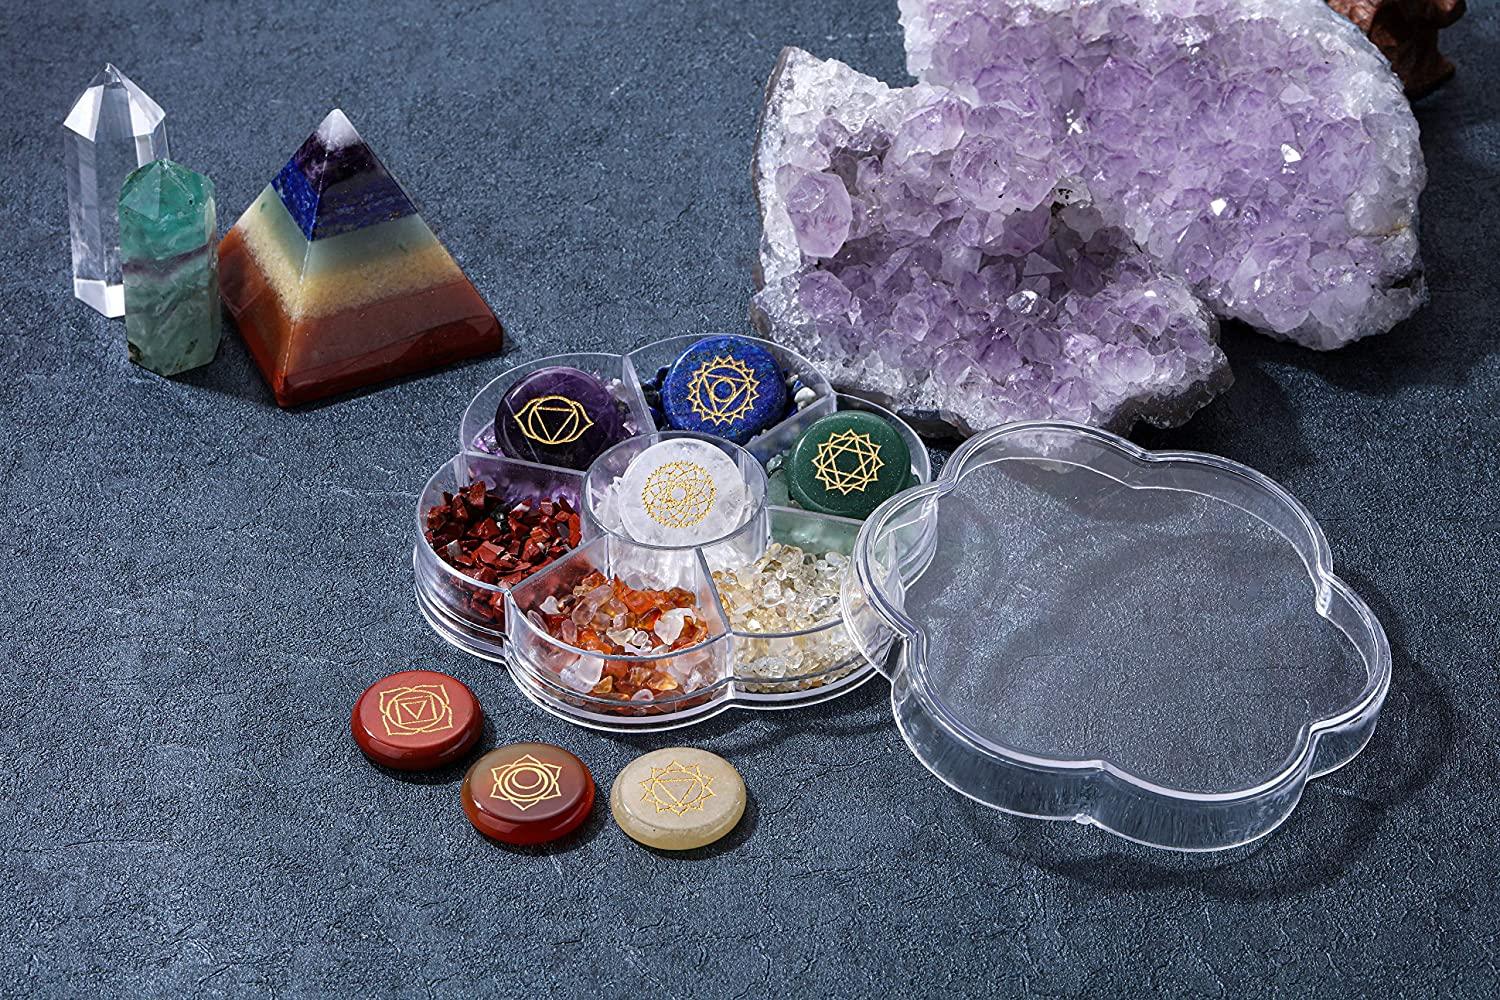 CrystalTears 7 Chakra Crystal Stones Natural Reiki Healing Crystals  Gemstones with Engraved Chakra Symbol Tumbled Polished Chakra Stone Kit for Meditation  Crystal Therapy